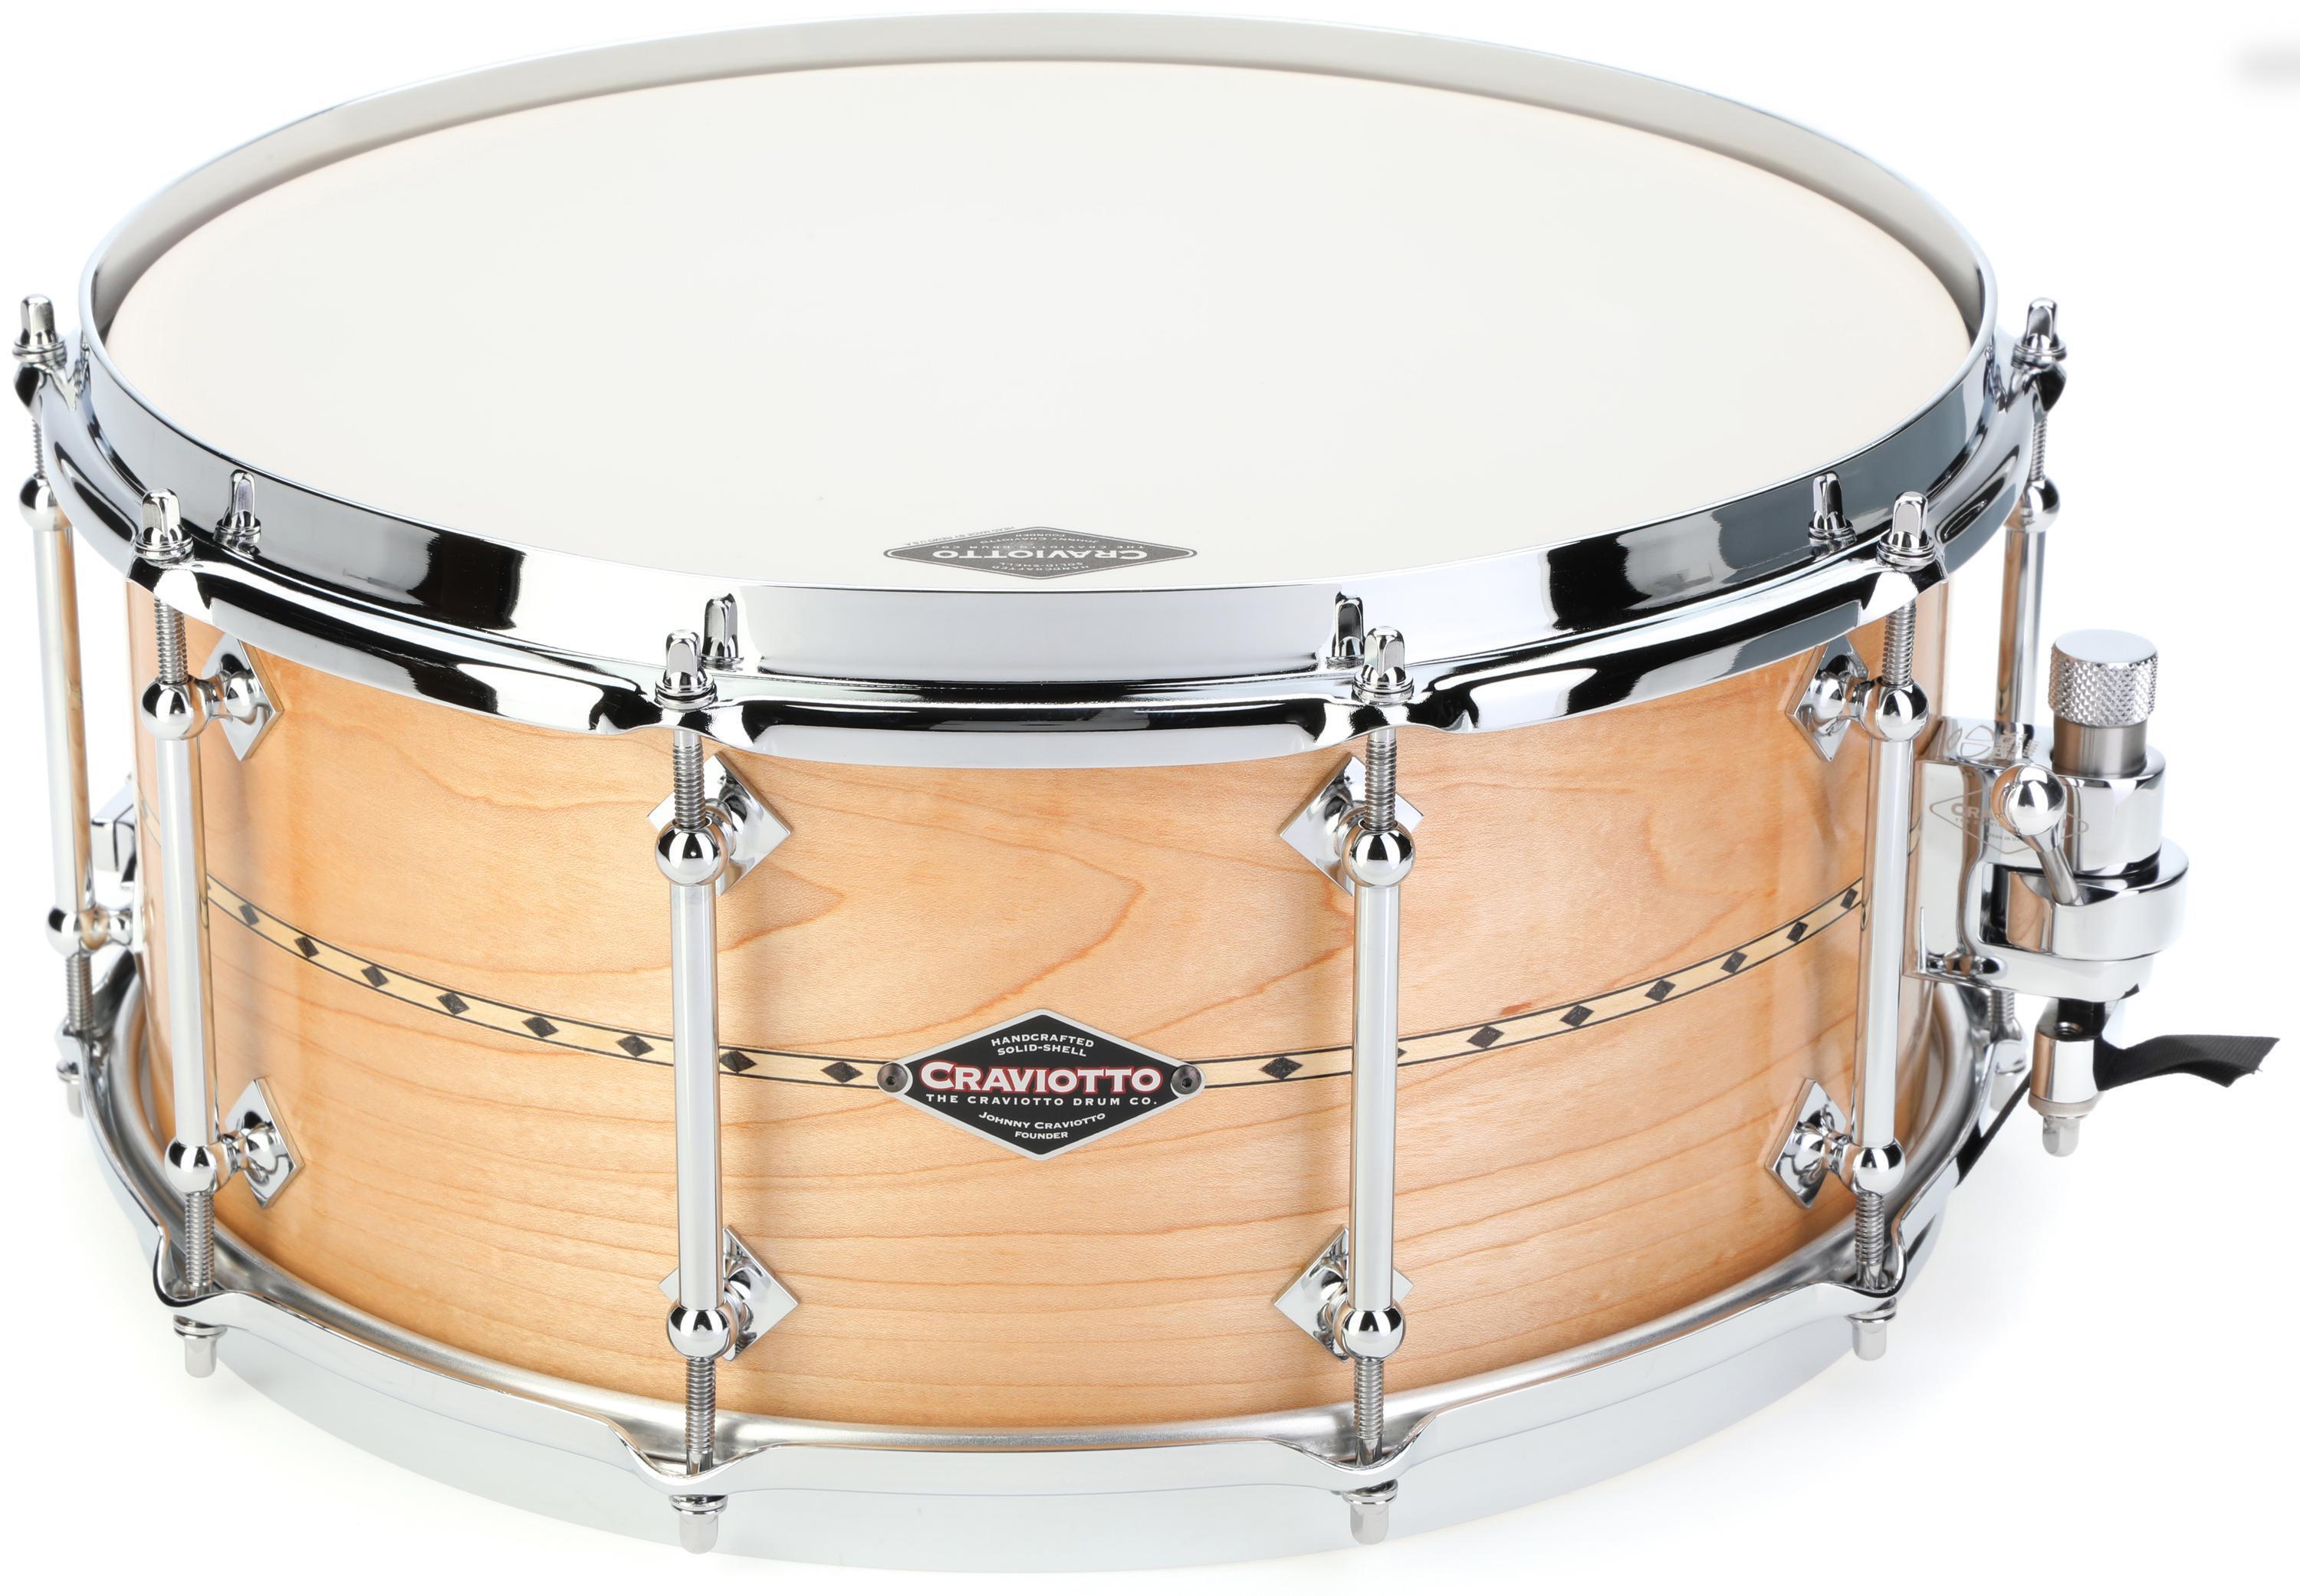 Snare Drum Buying Guide